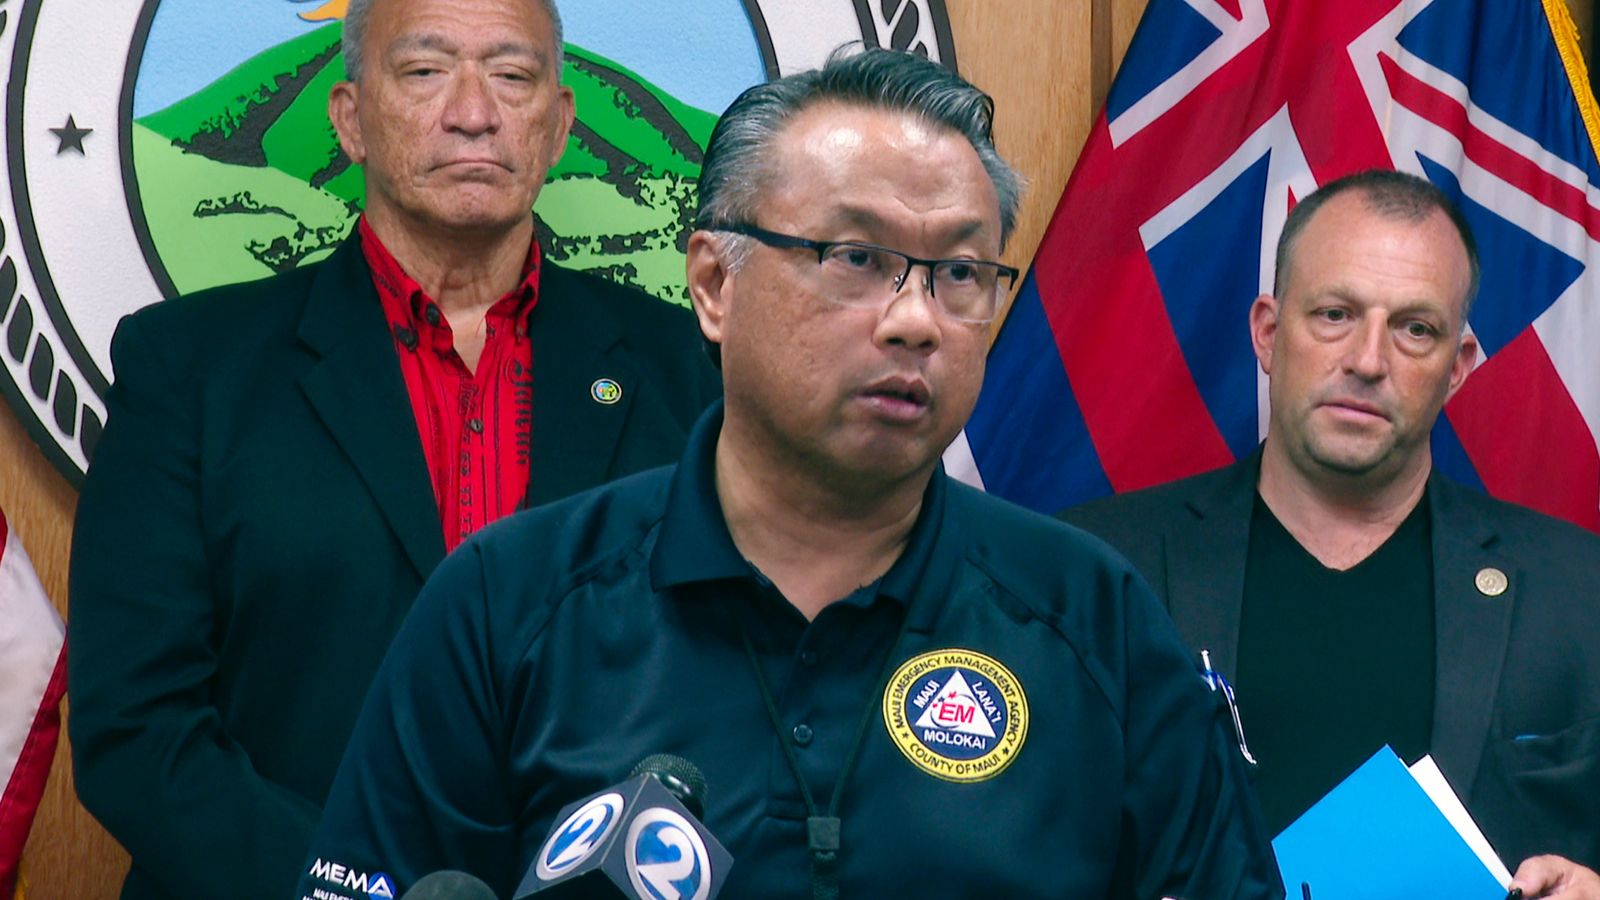 Hawaii wildfires: Maui's emergency services chief quits following criticism over decision not to activate sirens